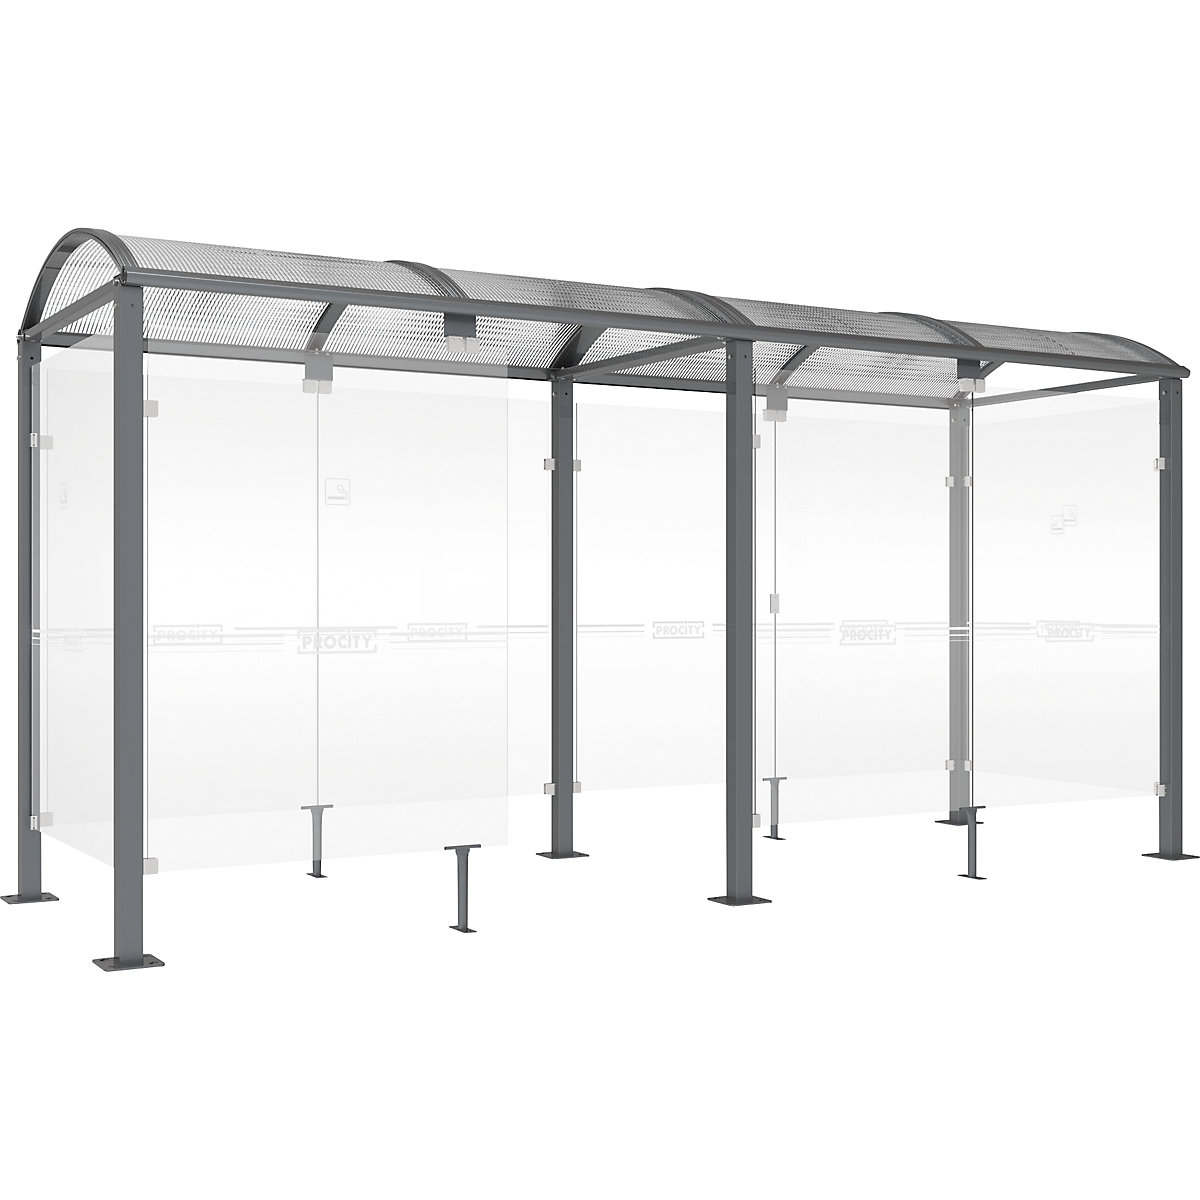 KLASSIK smokers' shelter – PROCITY, with cladding, width 5040 mm, charcoal-4